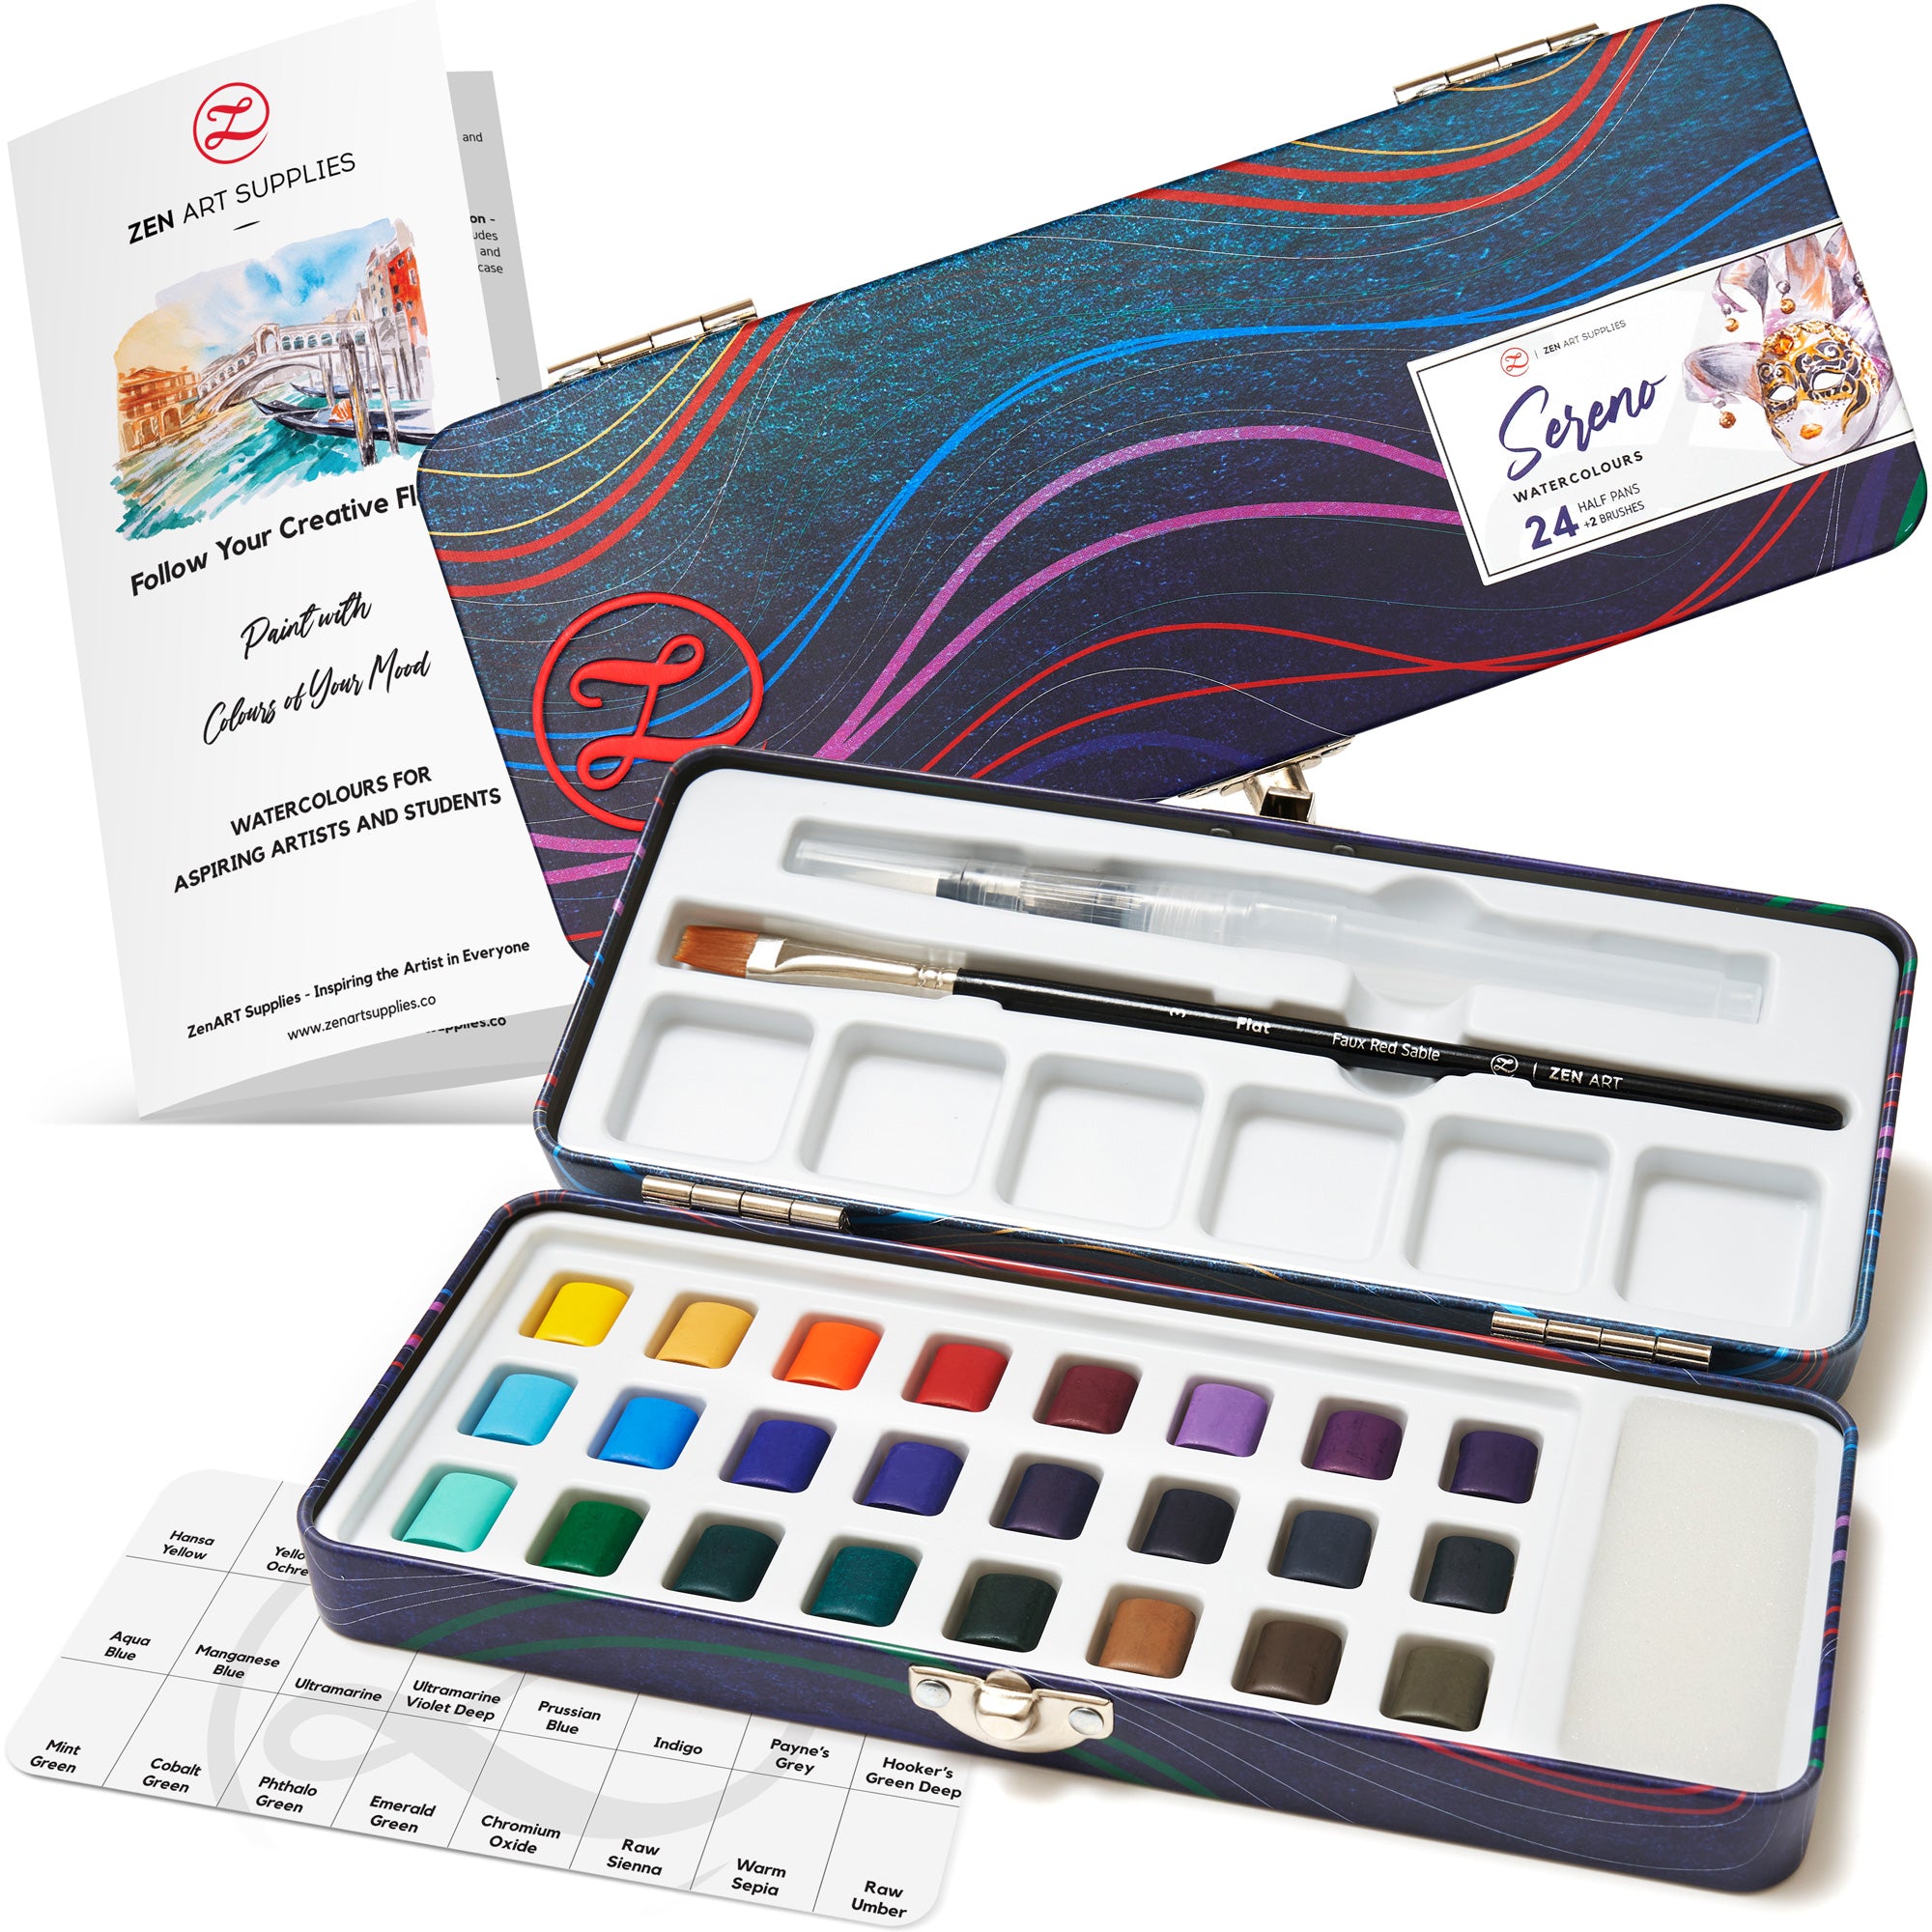 24 Watercolor Paint Sets For Kids and Adults - Bulk Pack of 24 Washable